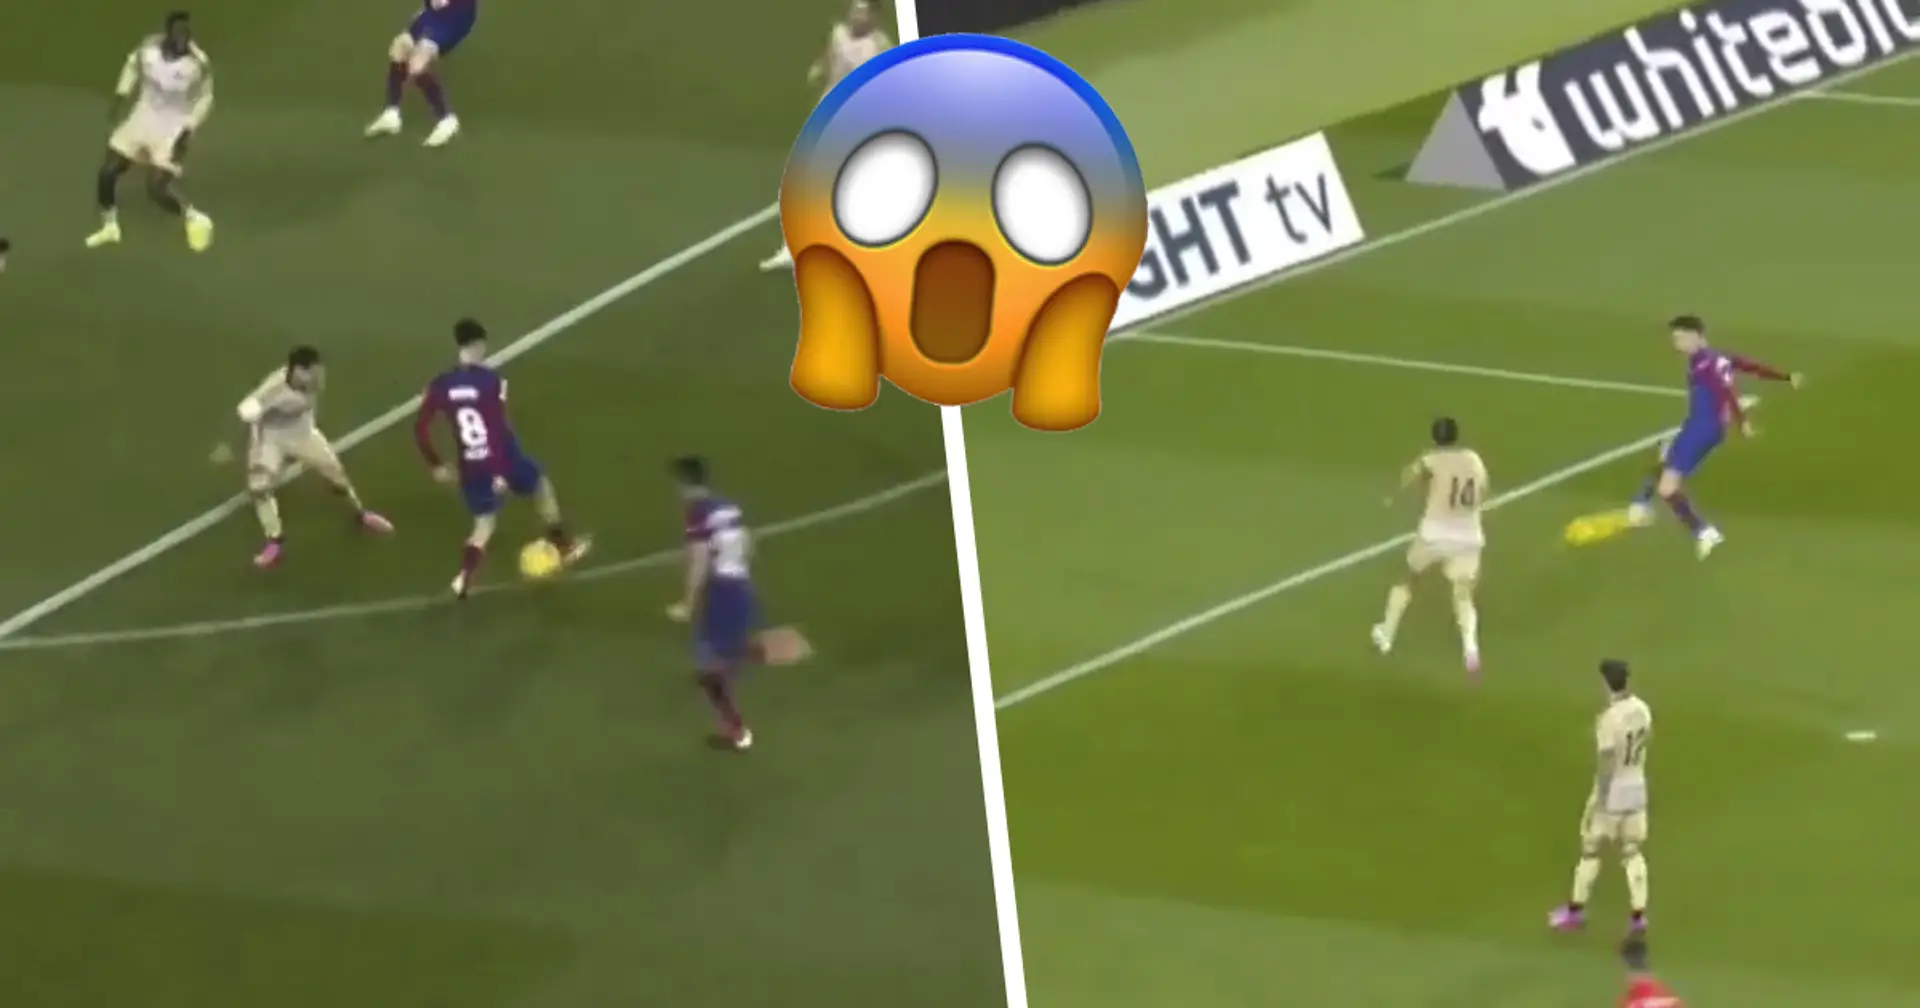 One of the most beautiful attacks of the season, that didn't end with a goal: an epic miss from Lewandowski after Barcelona's fantastic combination